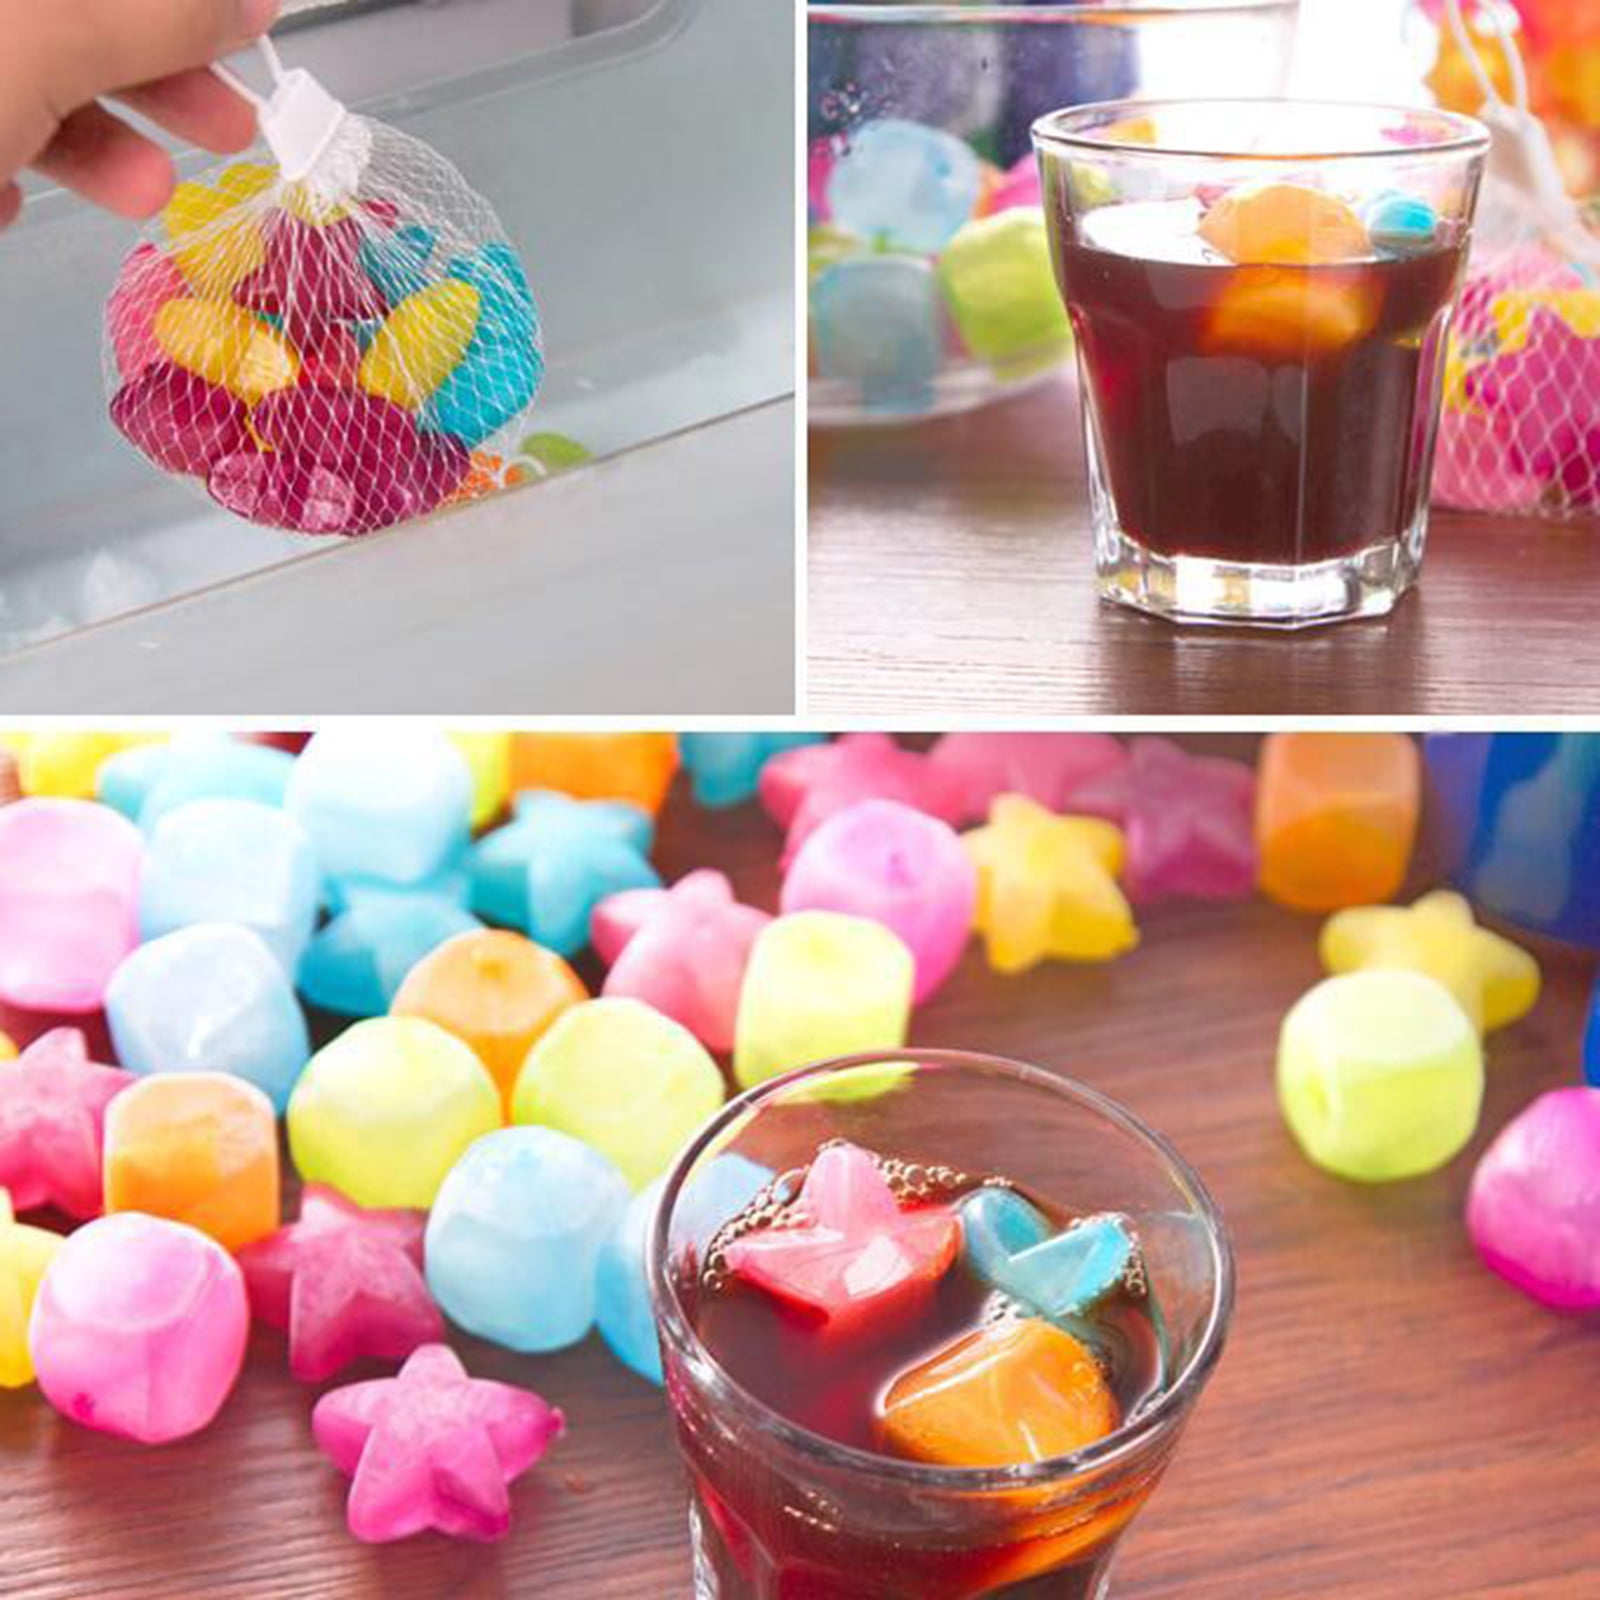 Hapy Shop 40 Pack Reusable Plastic Ice Cubes Star Shape for Drinks